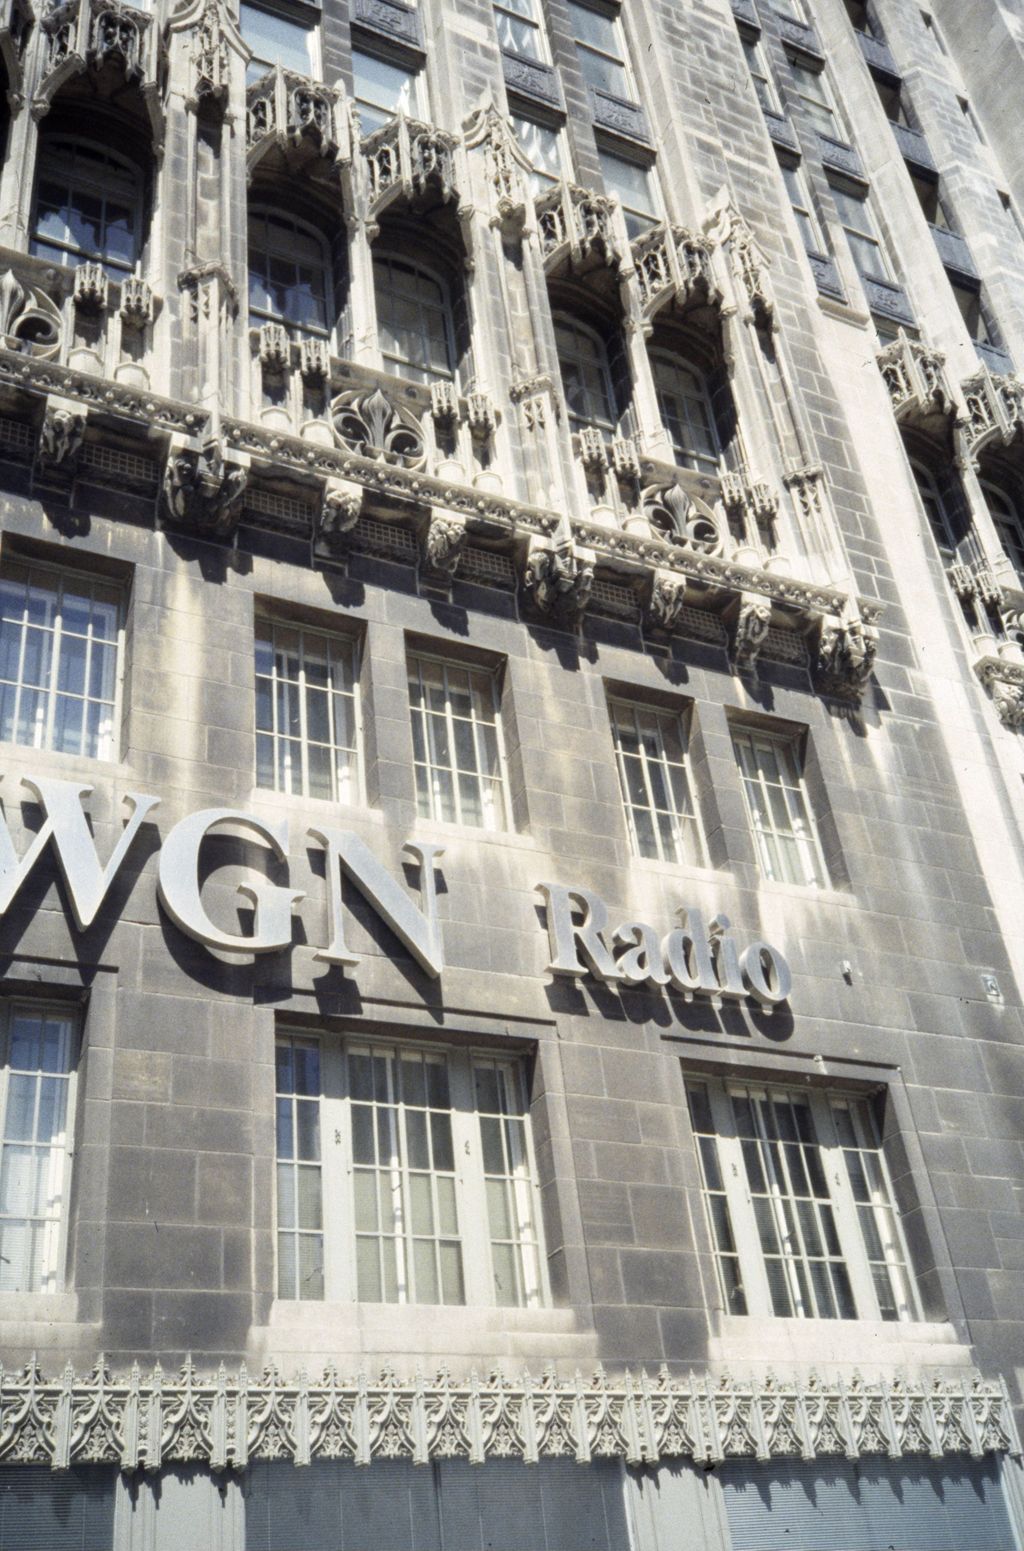 Miniature of Tribune Tower architectural ornament and WGN Radio sign